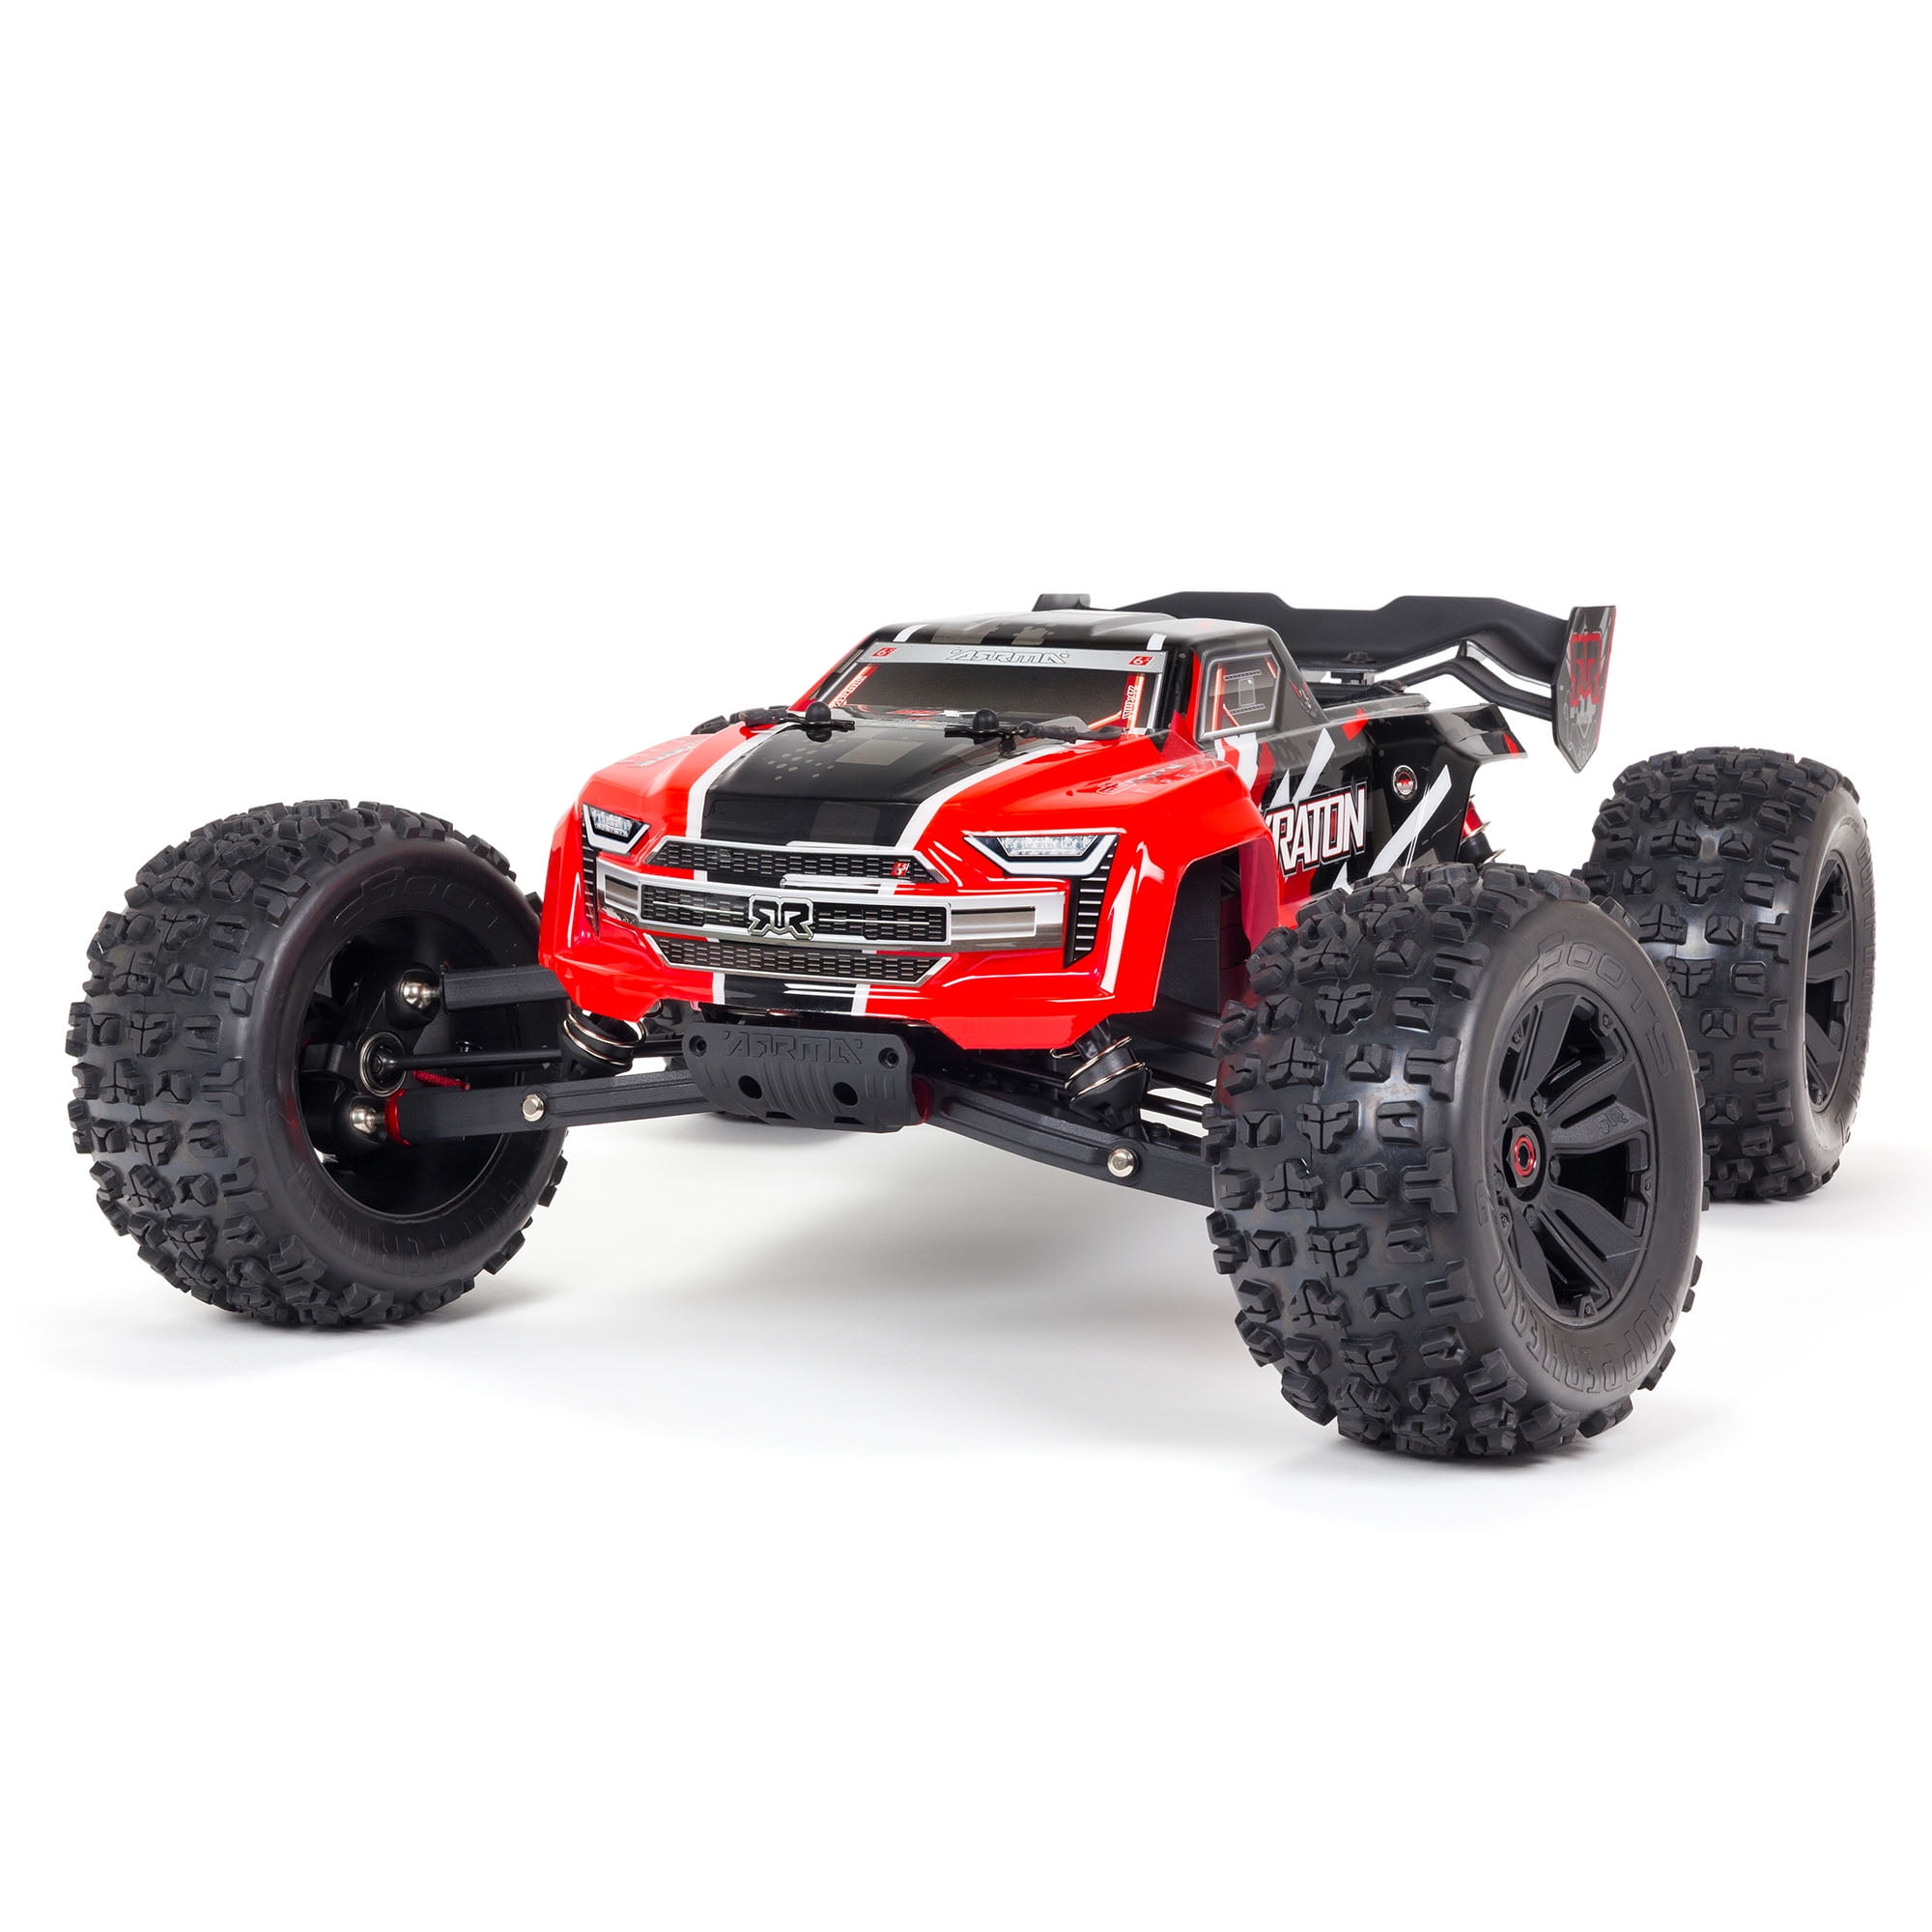 ARRMA 1/8 KRATON 6S V5 4 Wheel Drive BLX Speed Monster RC Truck with  Spektrum Firma RTR Transmitter and Receiver Included Batteries and Charger  Required Red ARA8608V5T1 Trucks Electric RTR Other 